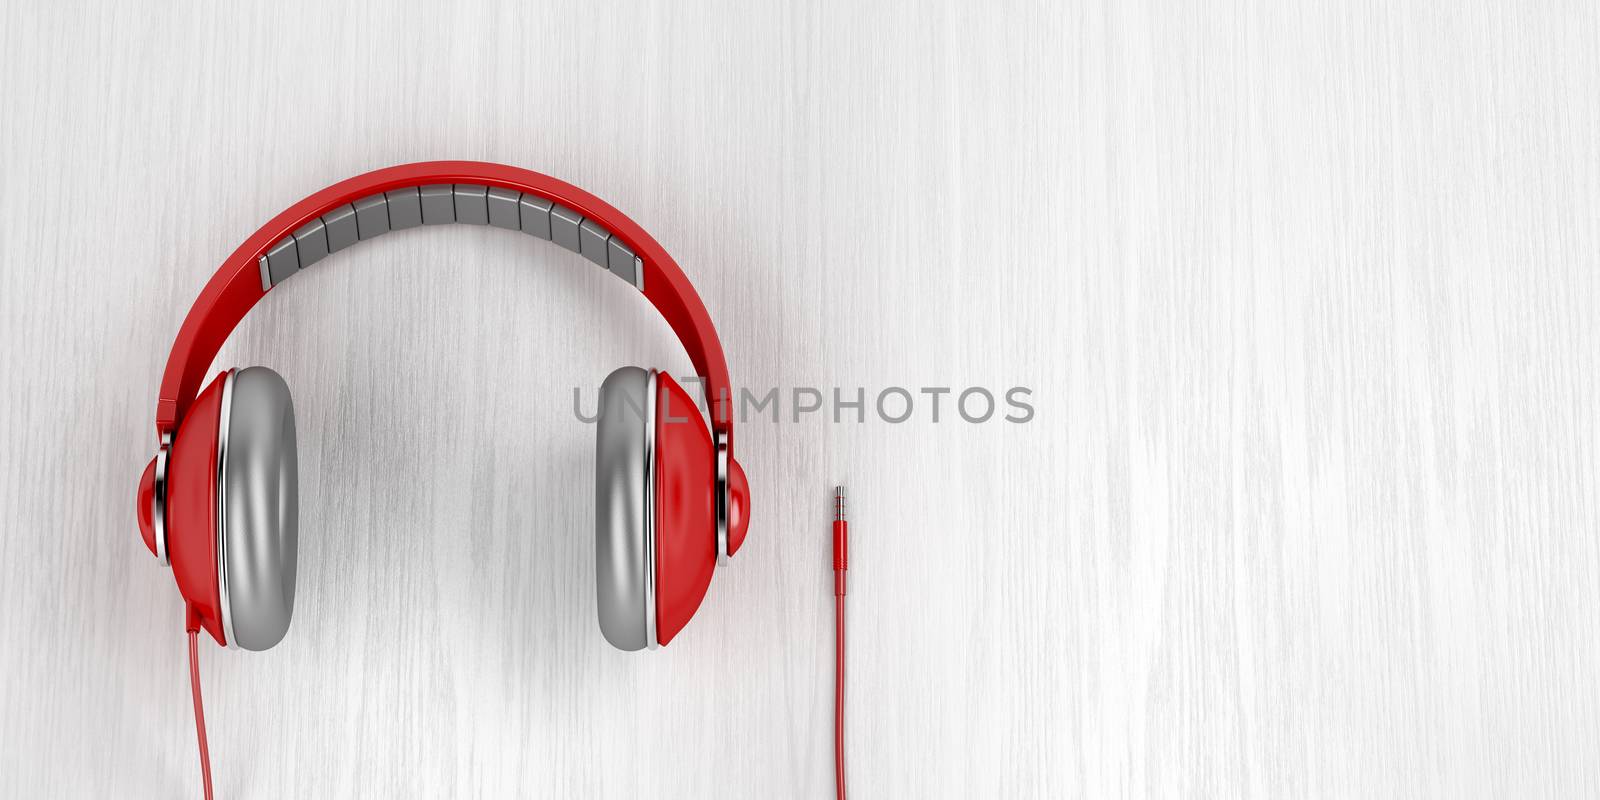 Big red headphones on wood background by magraphics